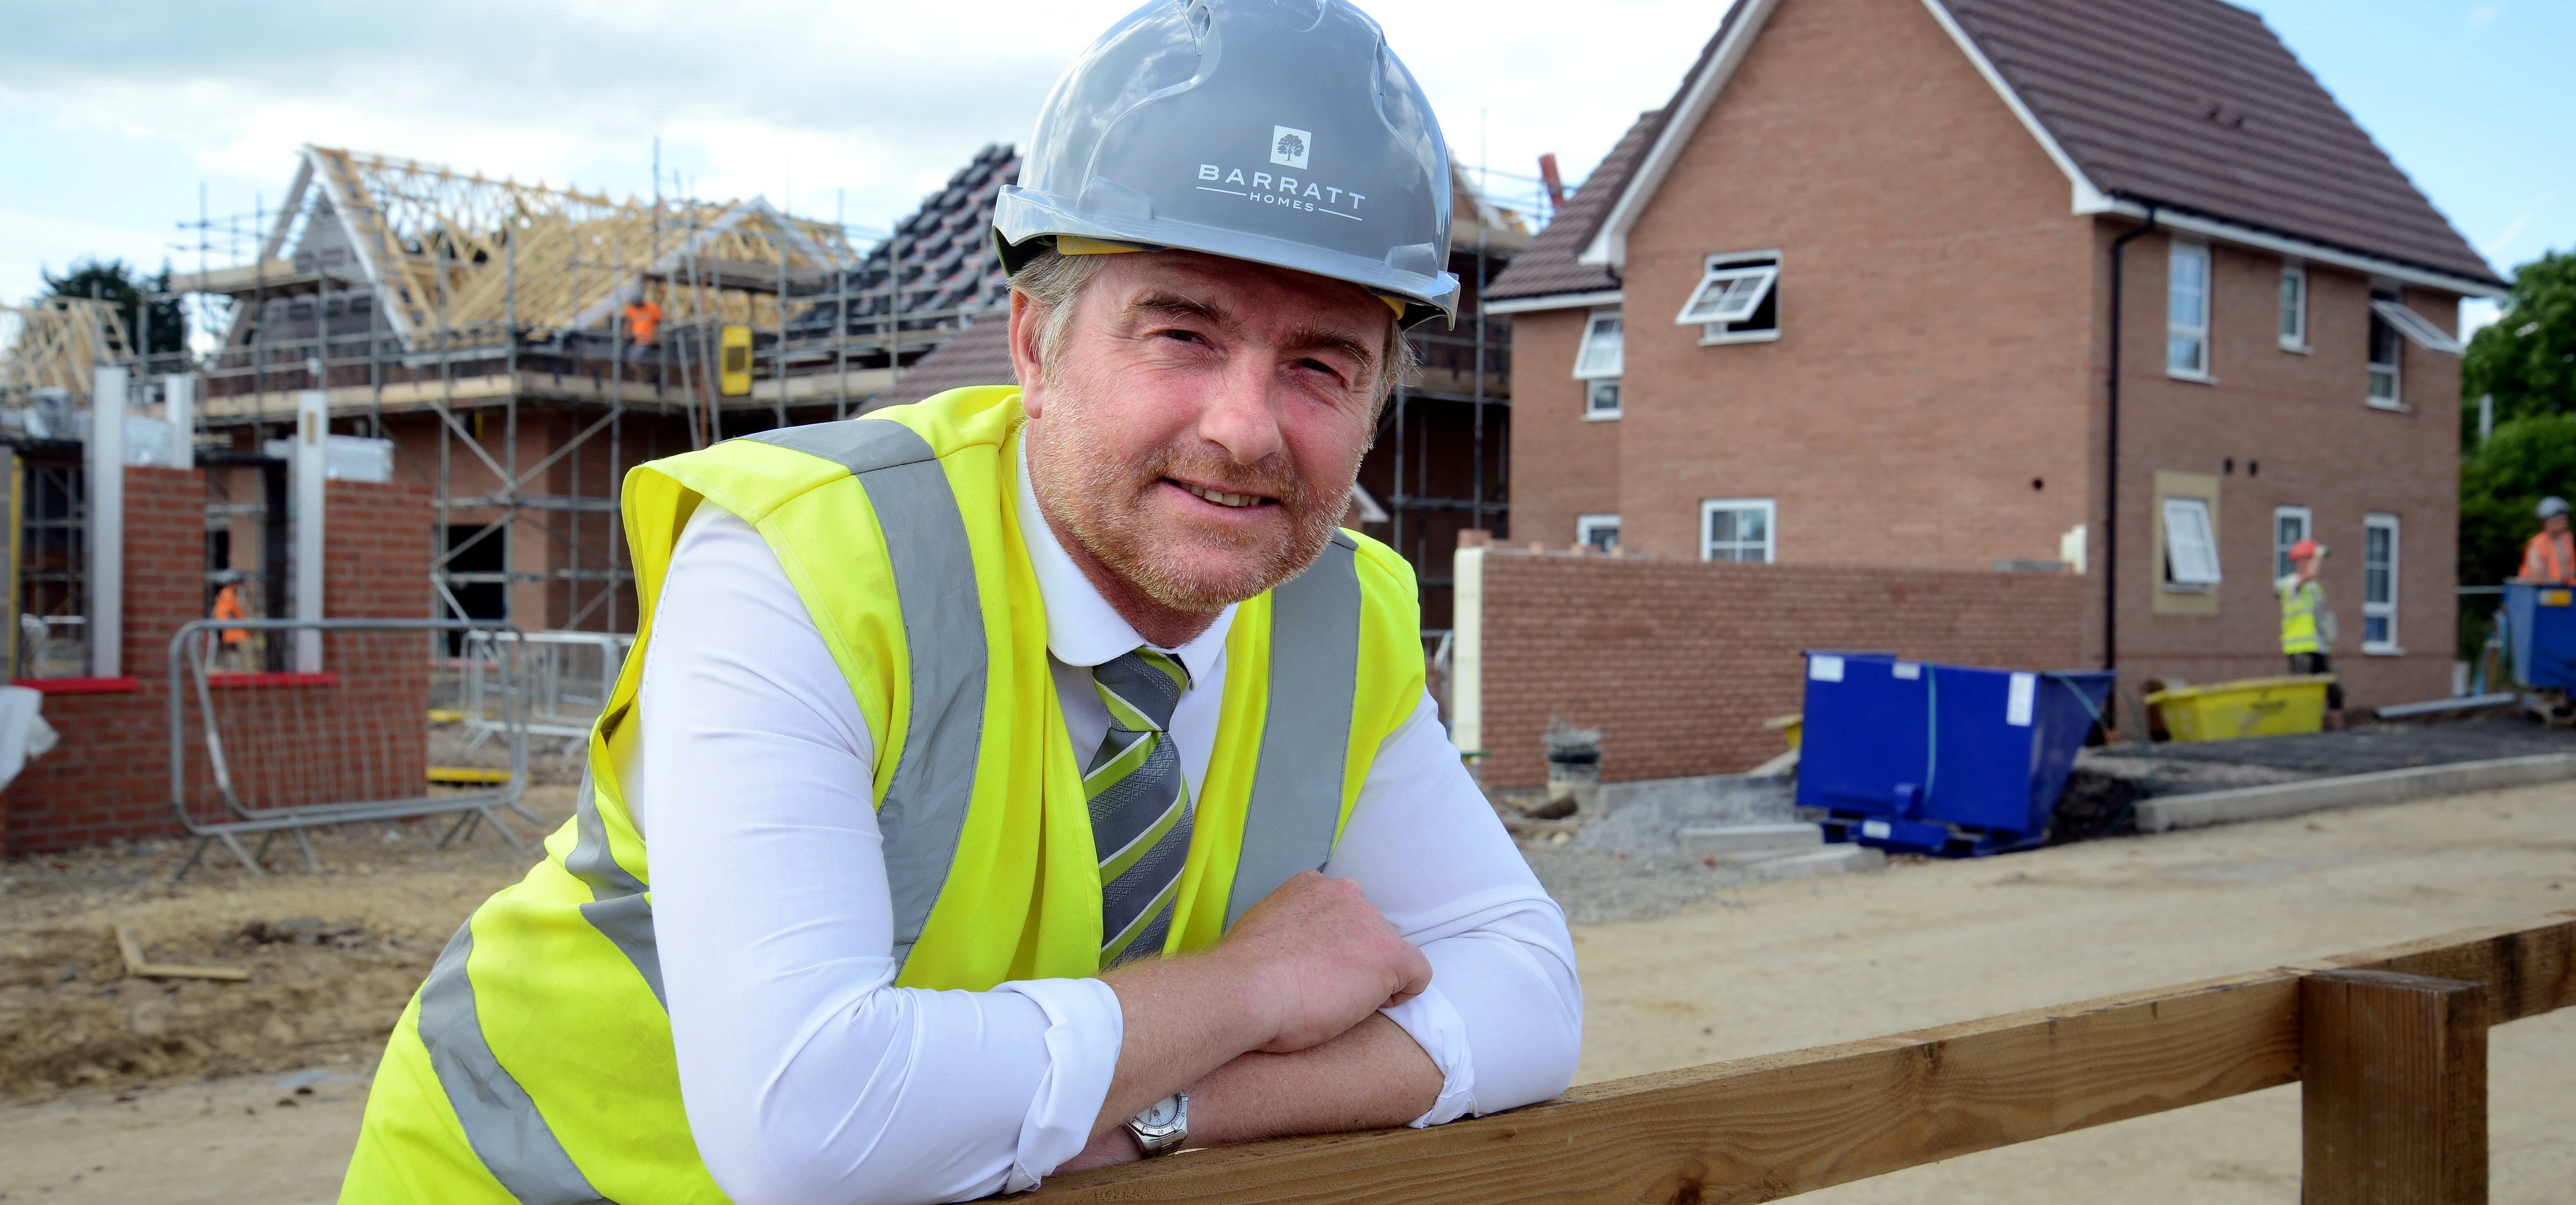 Jim Bage, Site Manager at South Fields, Morpeth